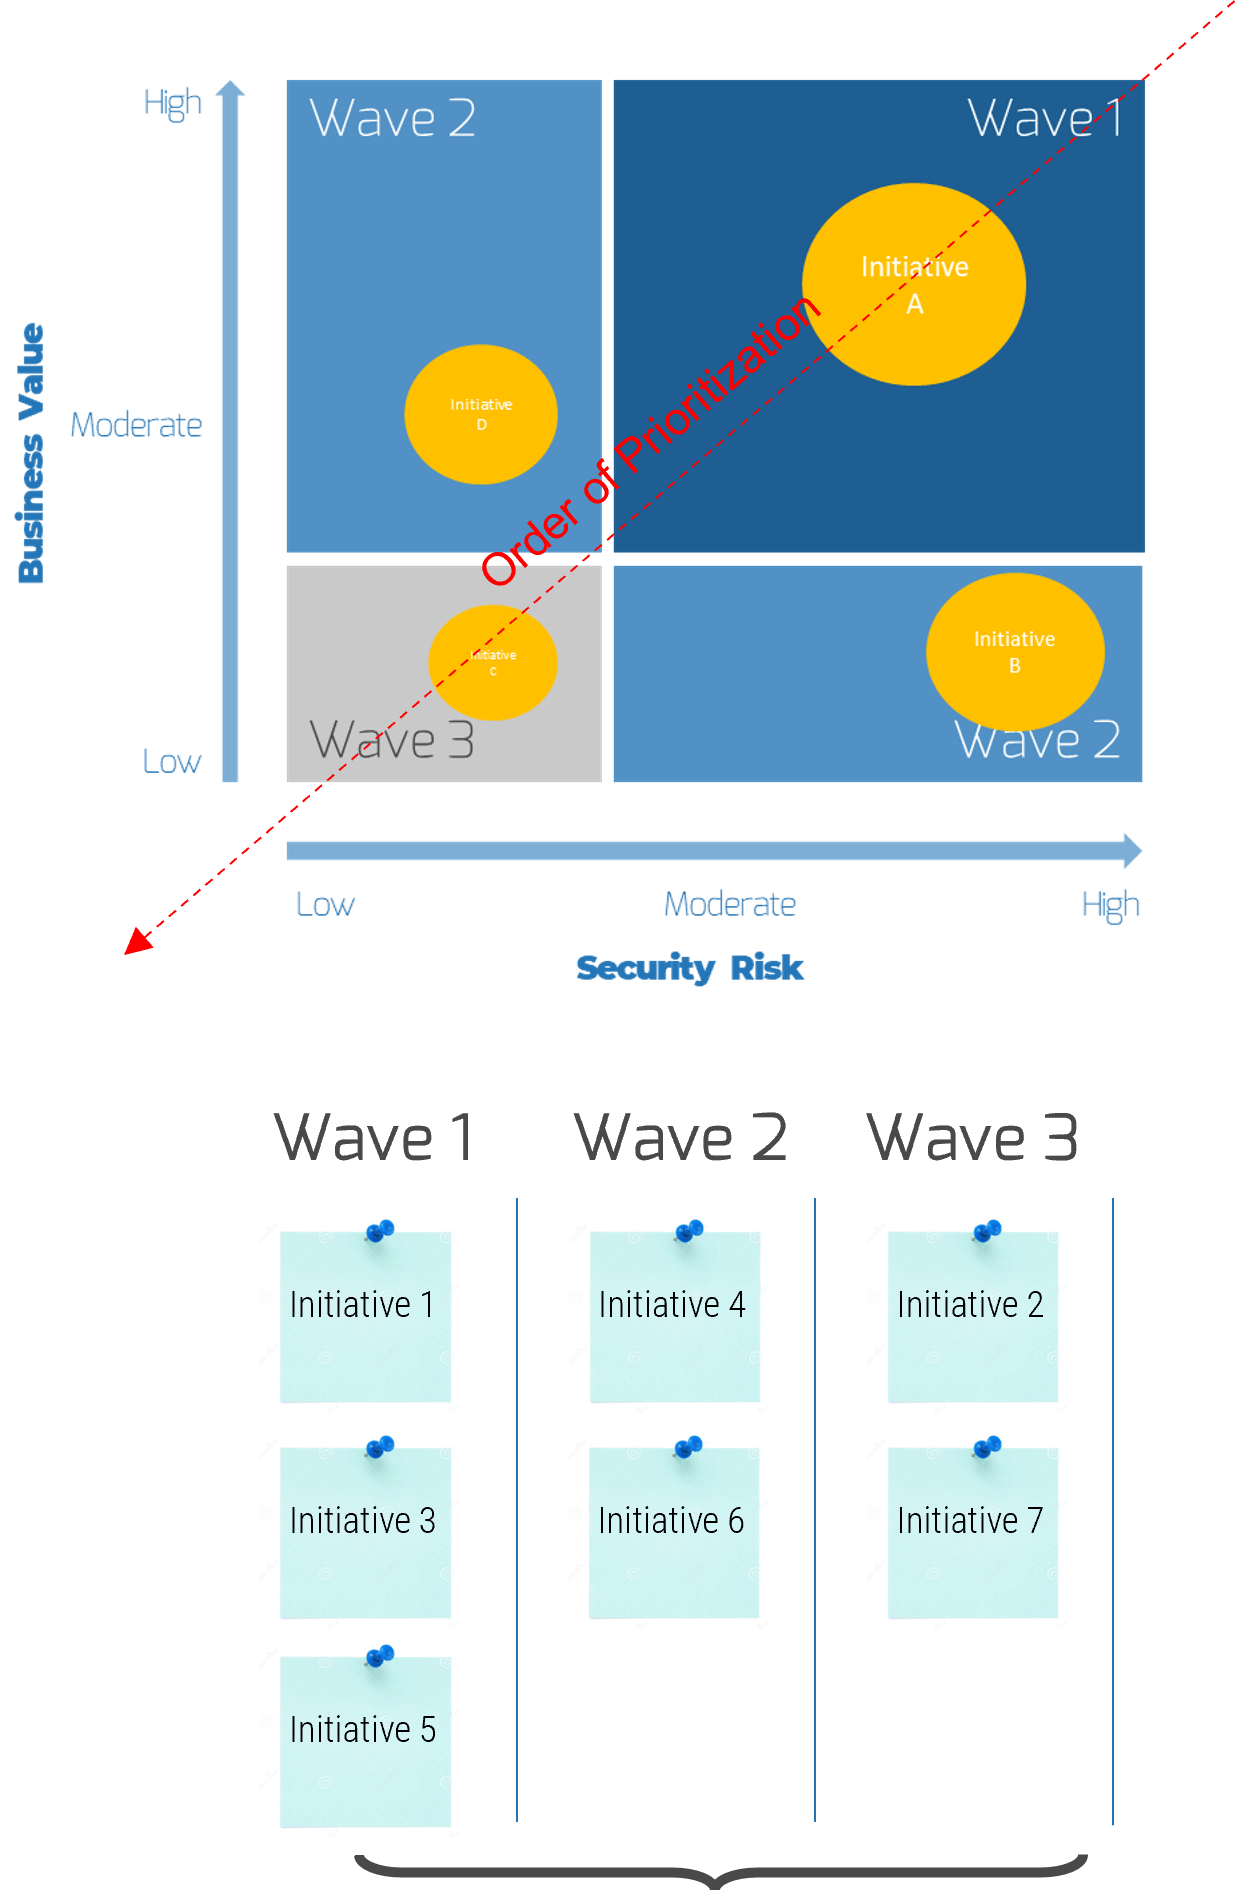 This is an image the Security Risk Vs. Business value graph, above an image showing Initiatives Numbered 1-7, divided into Wave 1; Wave 2; and Wave 3.